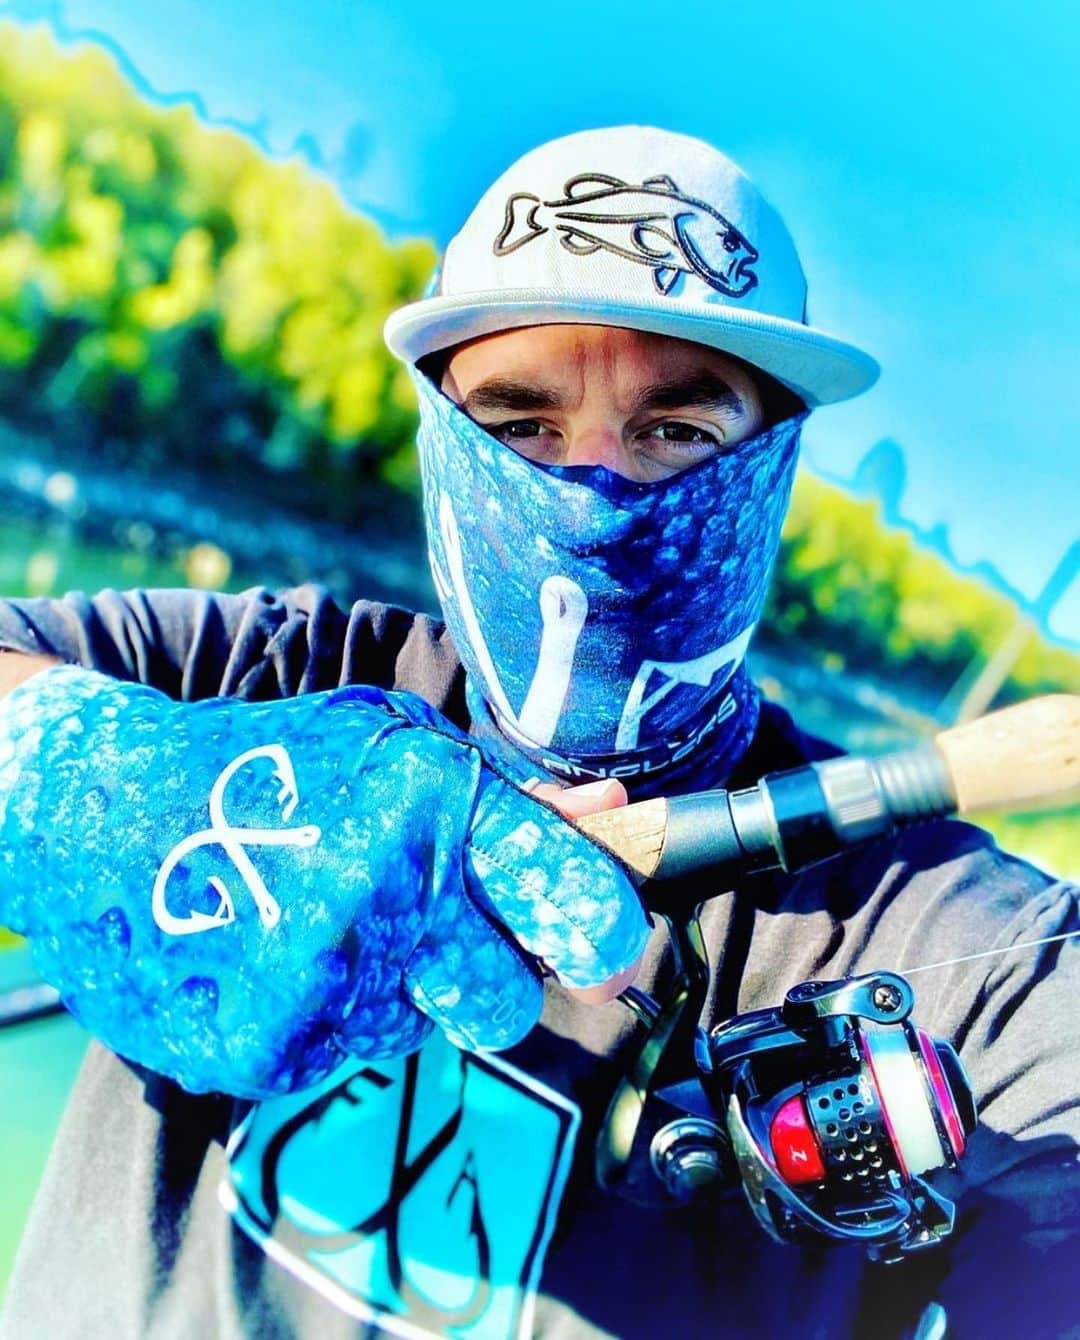 Filthy Anglers™のインスタグラム：「Looking filthy! Our buddy @the_pescador1 has his outfit on point. I’m not just saying it cause it’s our gear, I’m saying it cause not only does he look good, but he’s protecting his body from harmful rays ☀️ with our UPF gear. Thanks for making our products look great as you stay safe, you are Certified Filthy www.filthyanglers.com #fishing #filthyanglers #outdoors #nature #bassfish #bigbass #outdoors #upf #sun #hunting #monsterbass #bigfish #boat #kayak #anglerapproved」